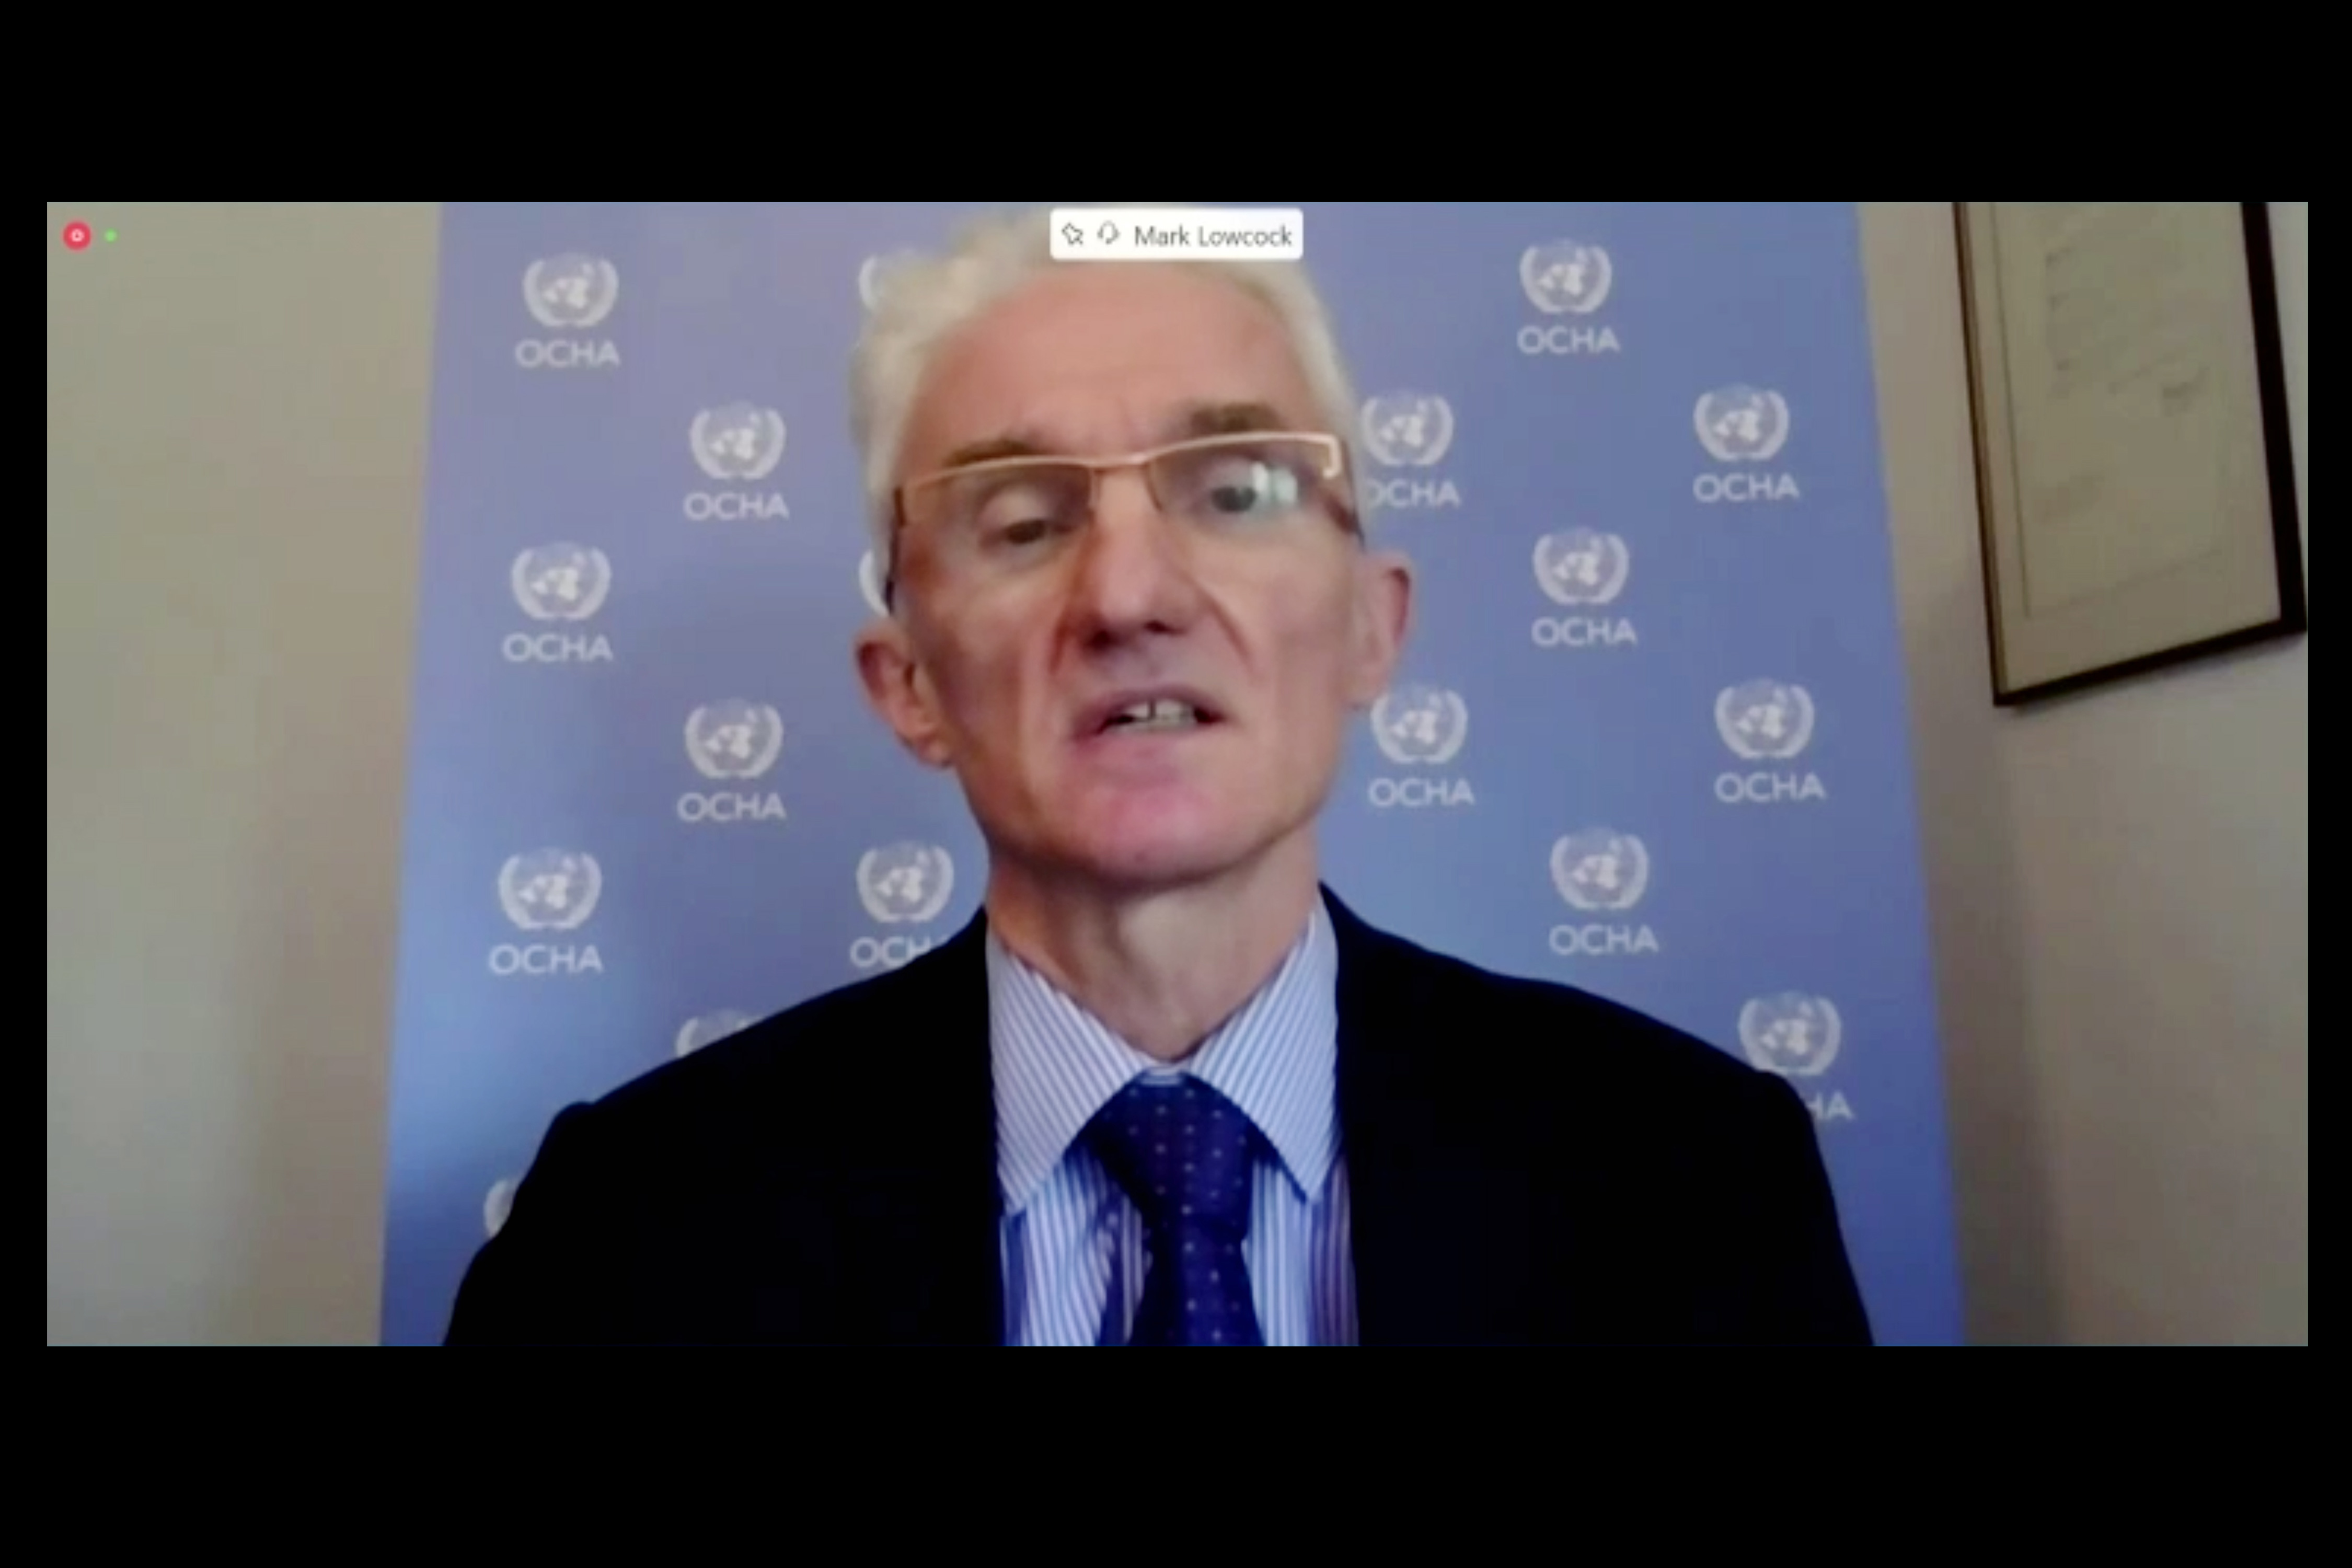 Mark Lowcock, UN Under-Secretary-General for Humanitarian Affairs and Emergency Relief Coordinator